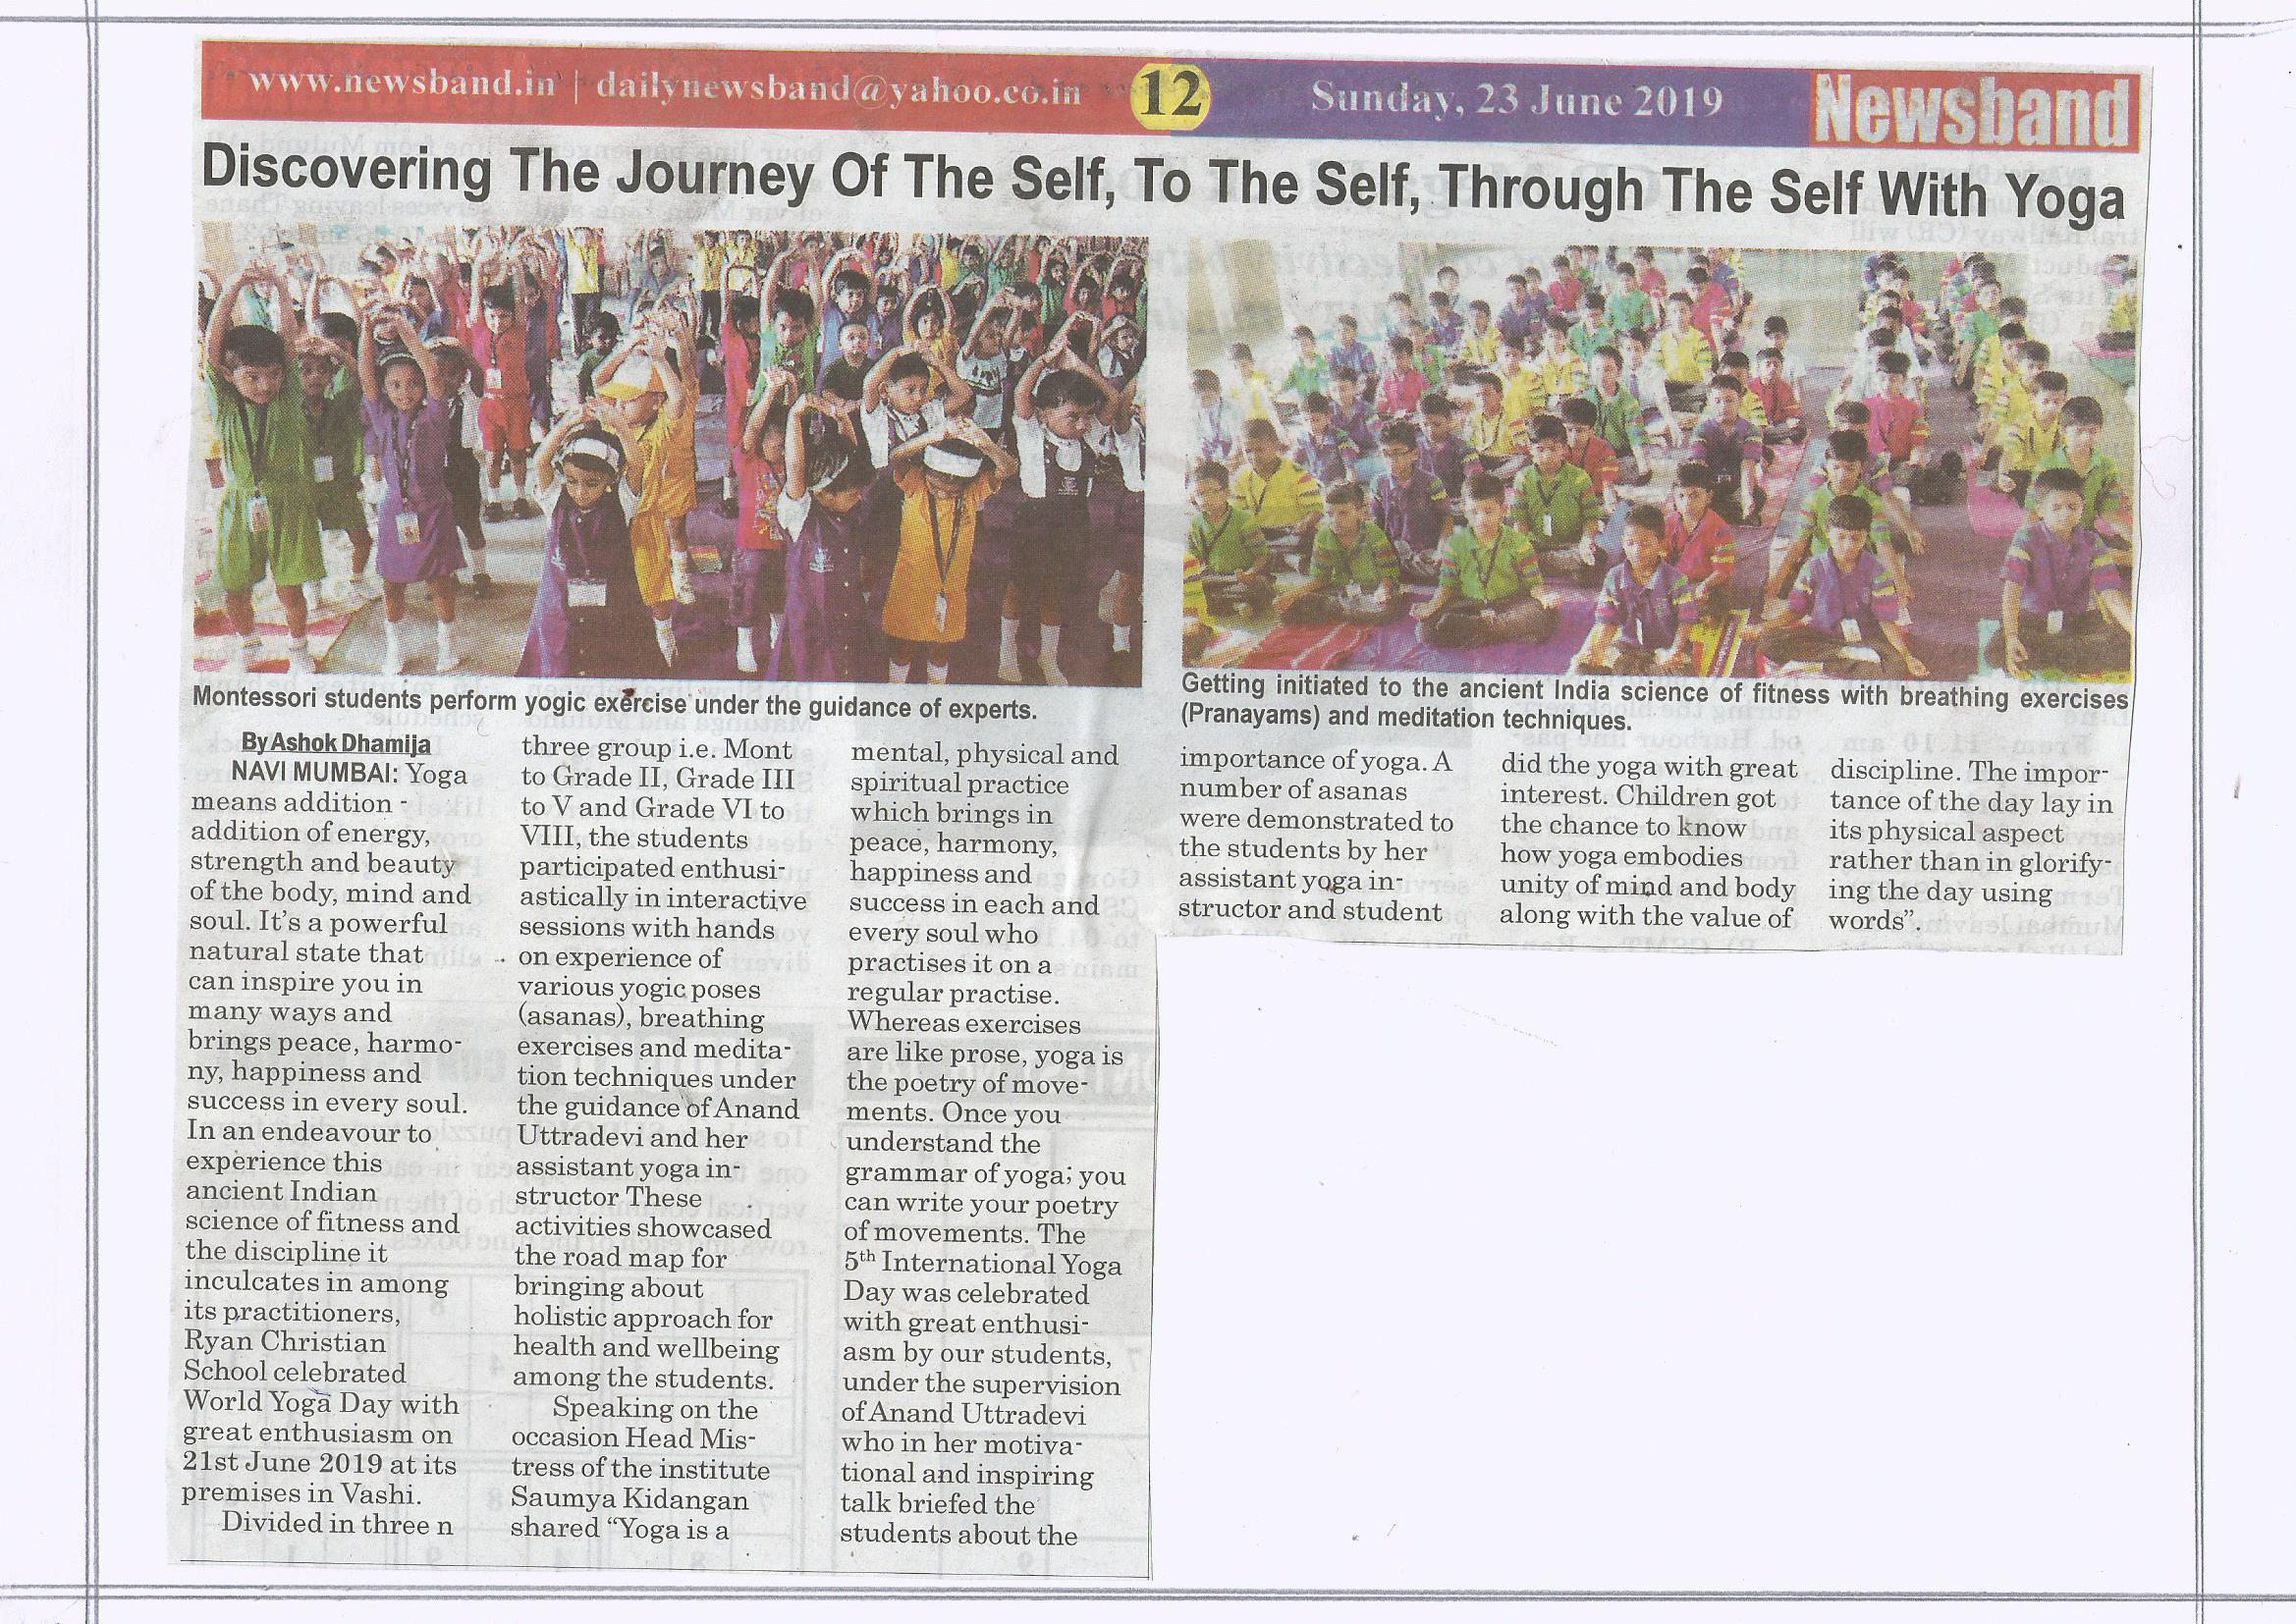 World Yoga Day was featured in Newsband